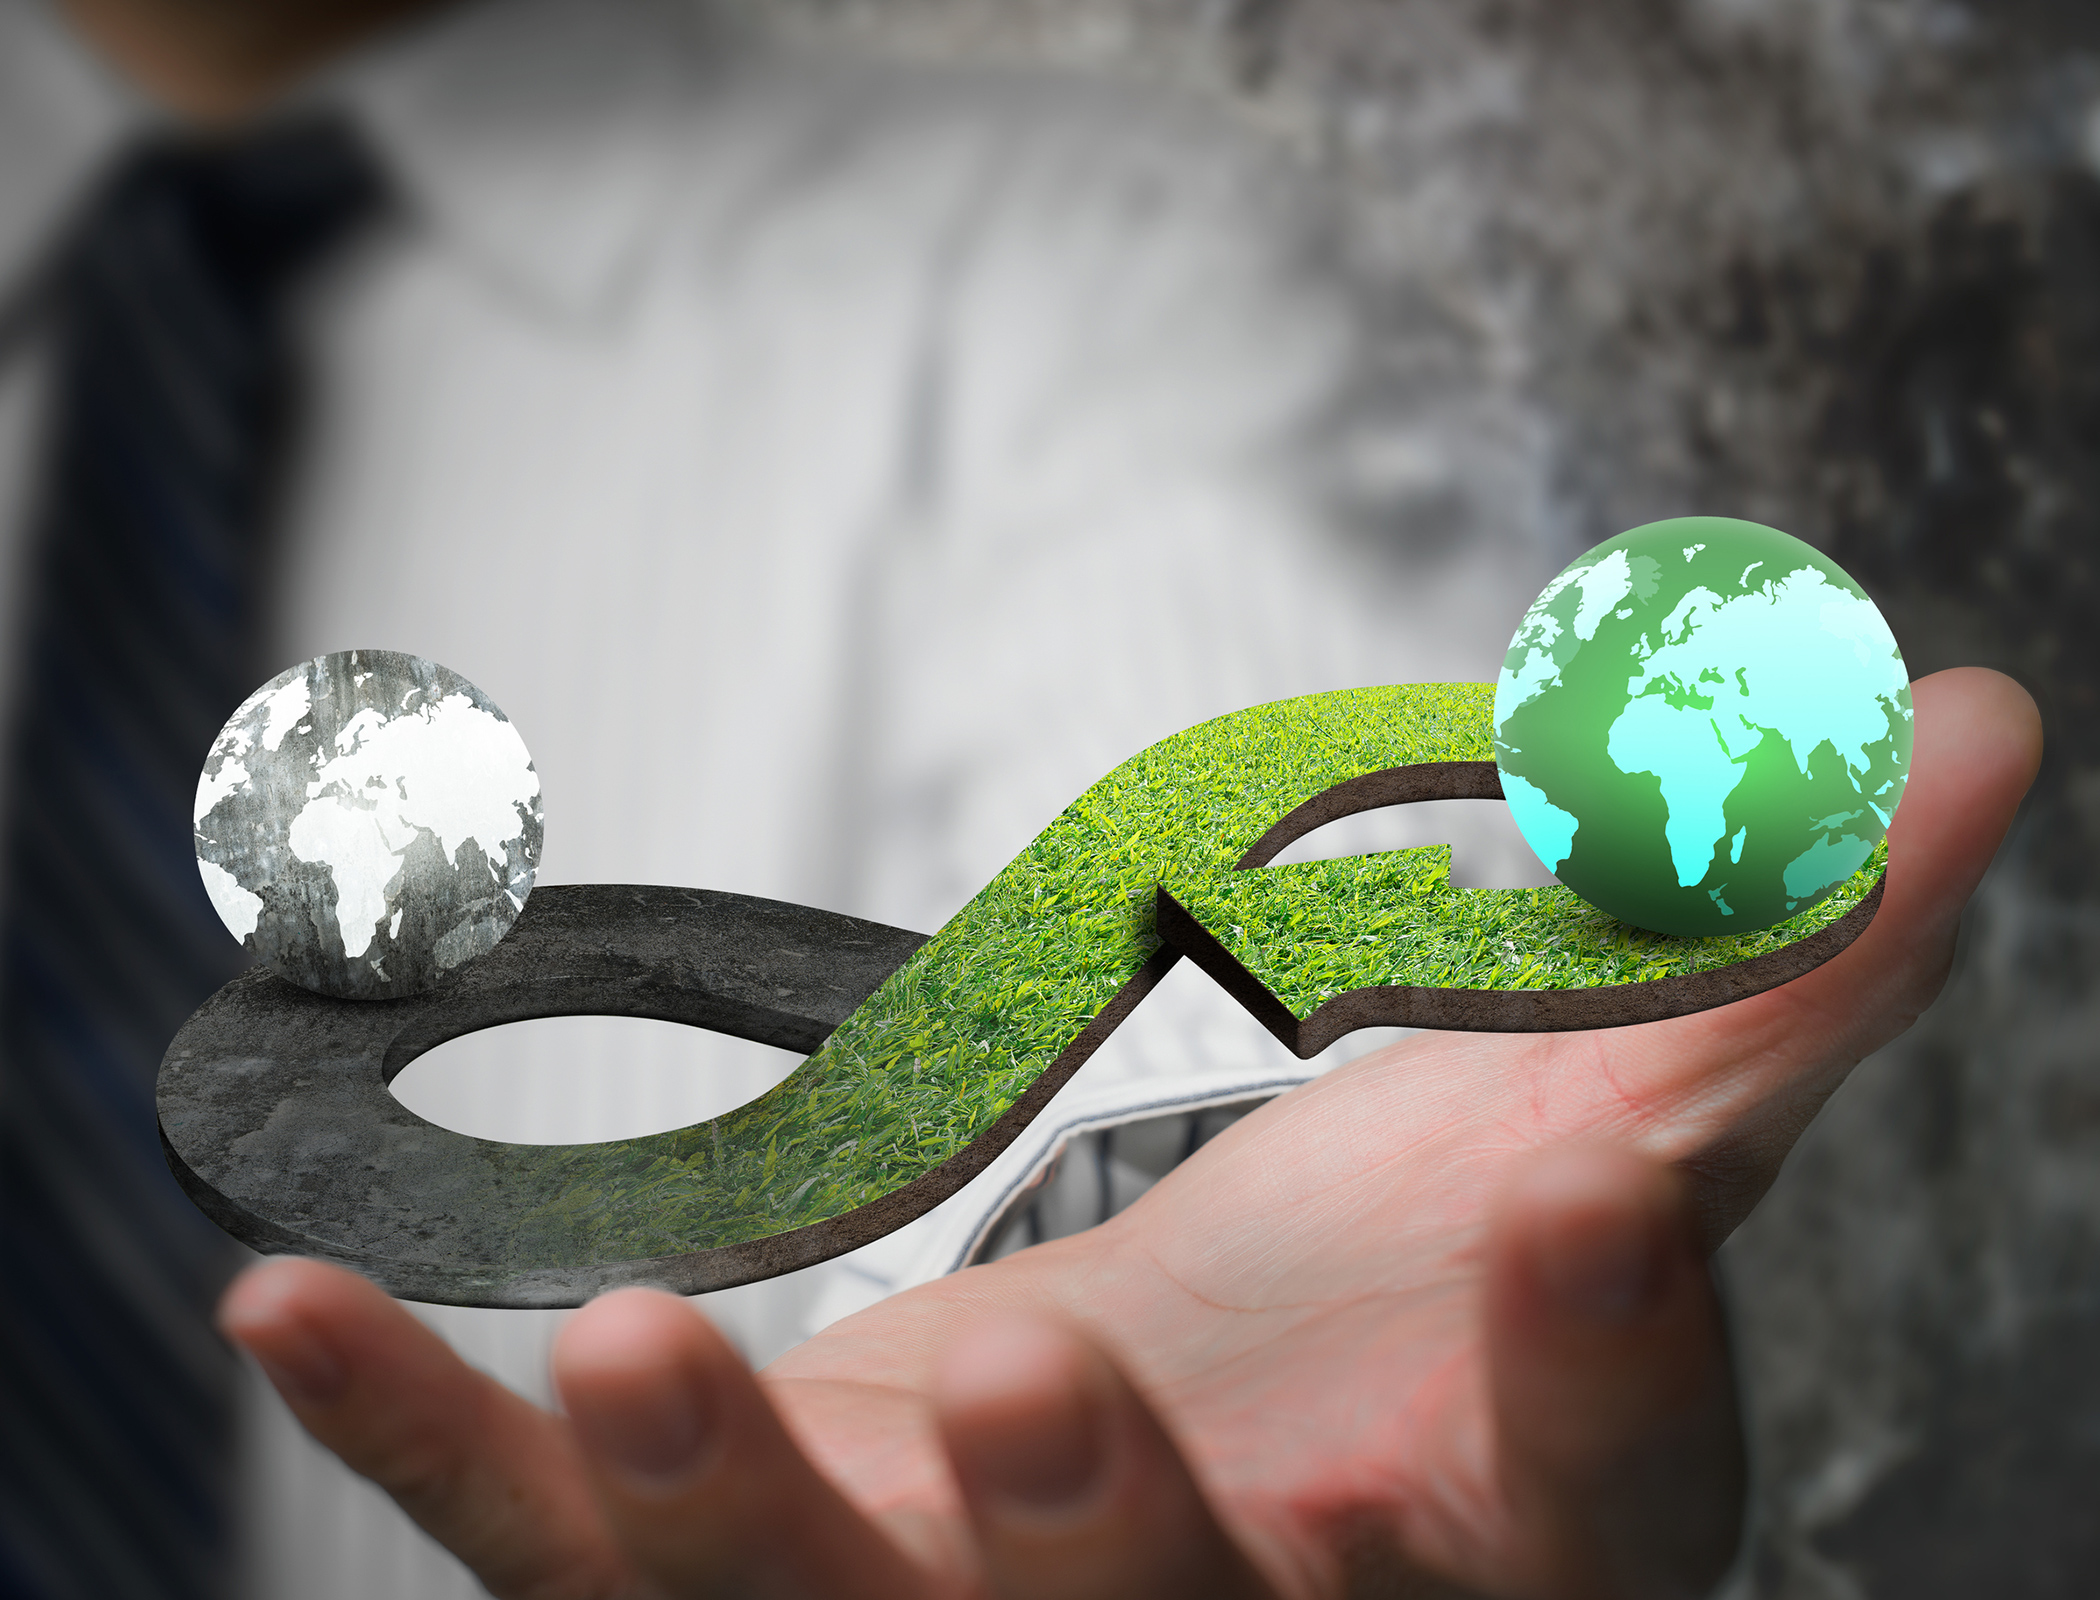 Integrated digital insights can help industry cut waste and embrace the circular economy